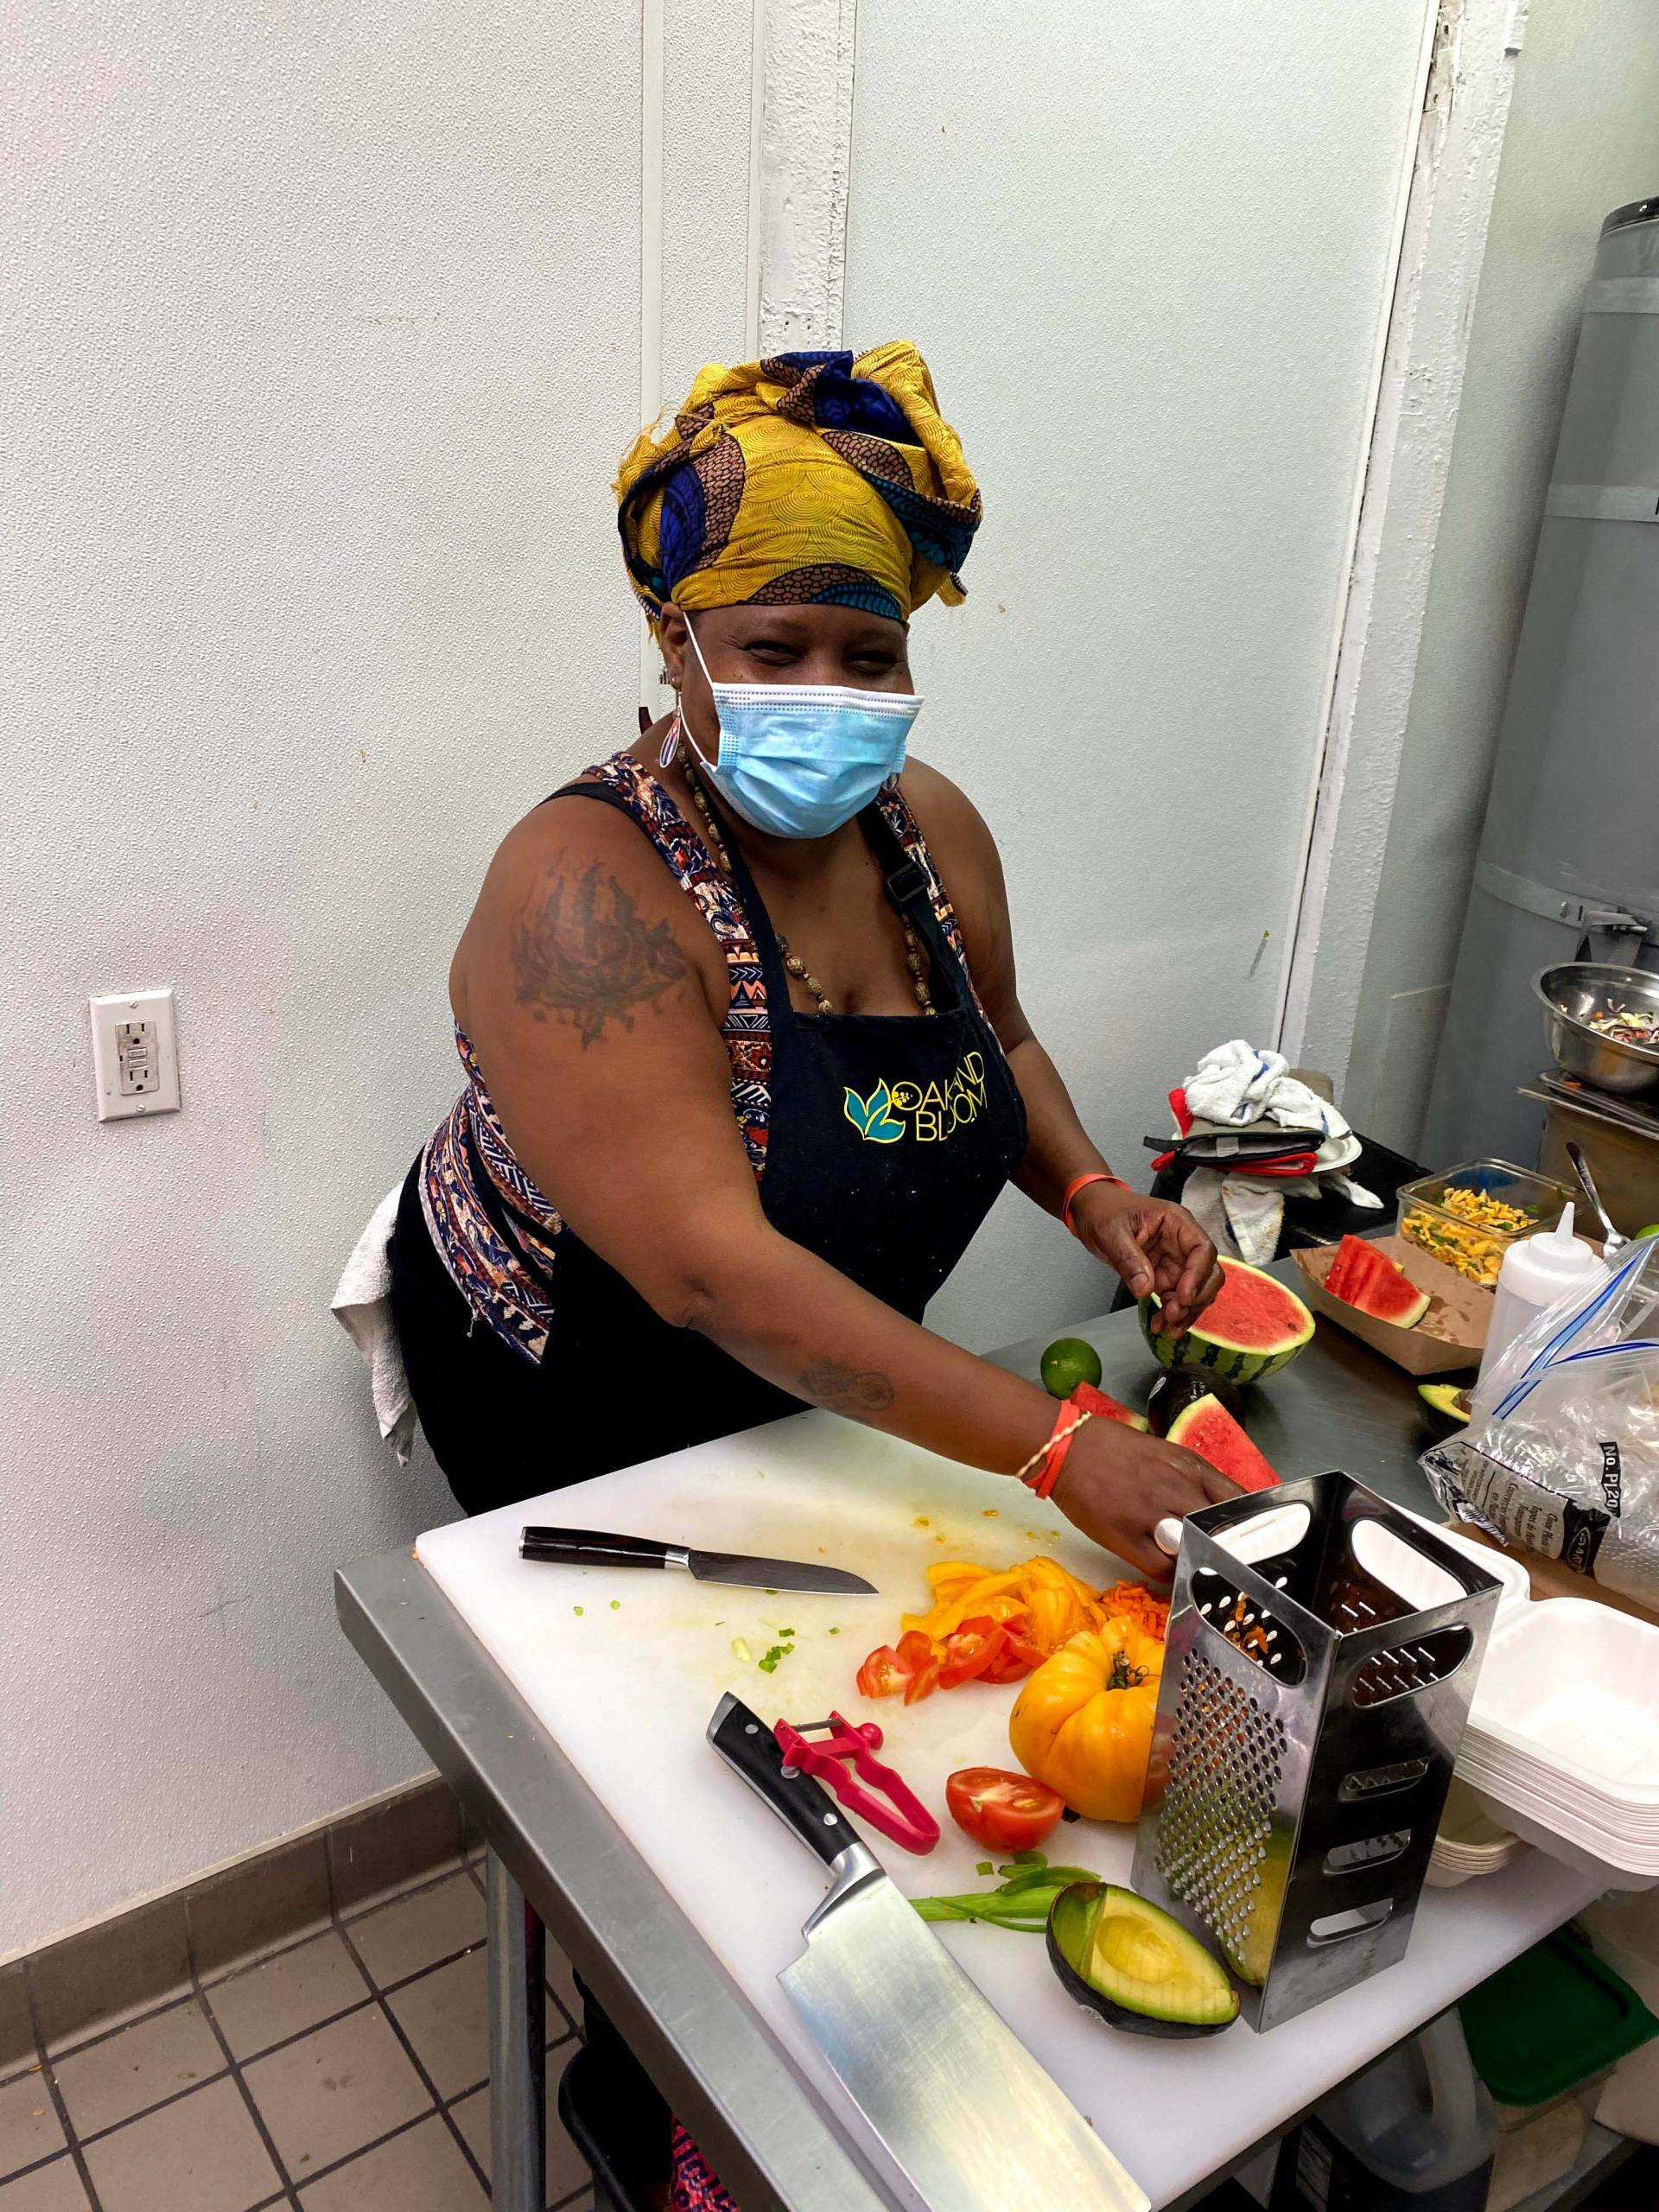 A Black woman wearing a face mask and black apron cuts up orange and red peppers on a small kitchen prep counter.